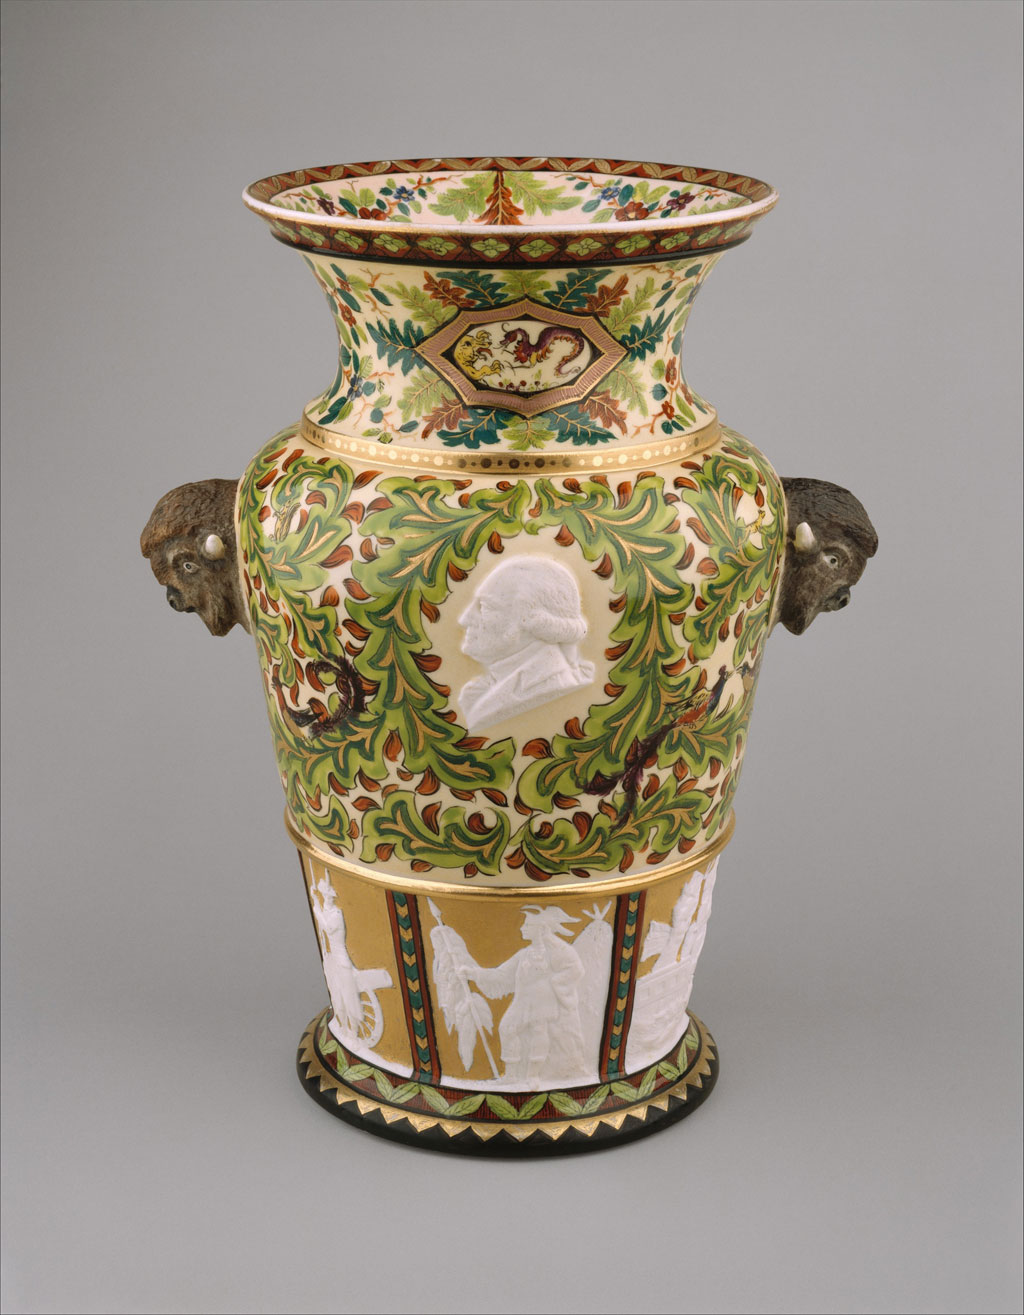 highlights from the met's collection (32)